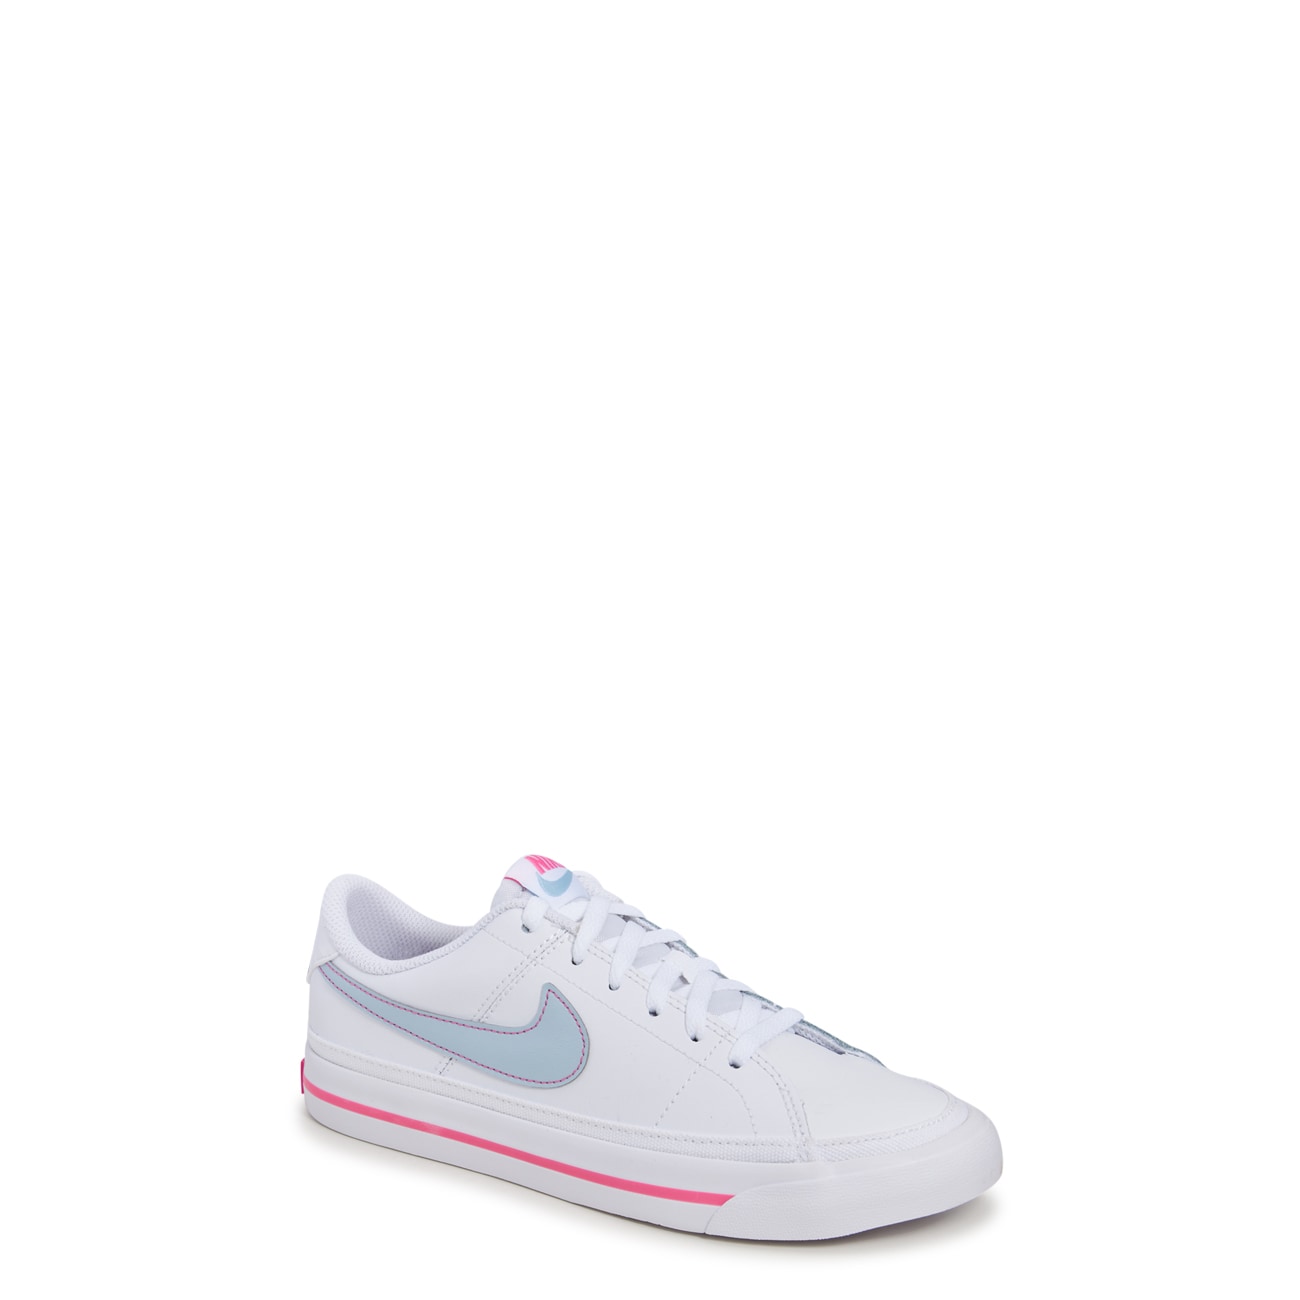 Youth Girls' Court Legacy Sneaker